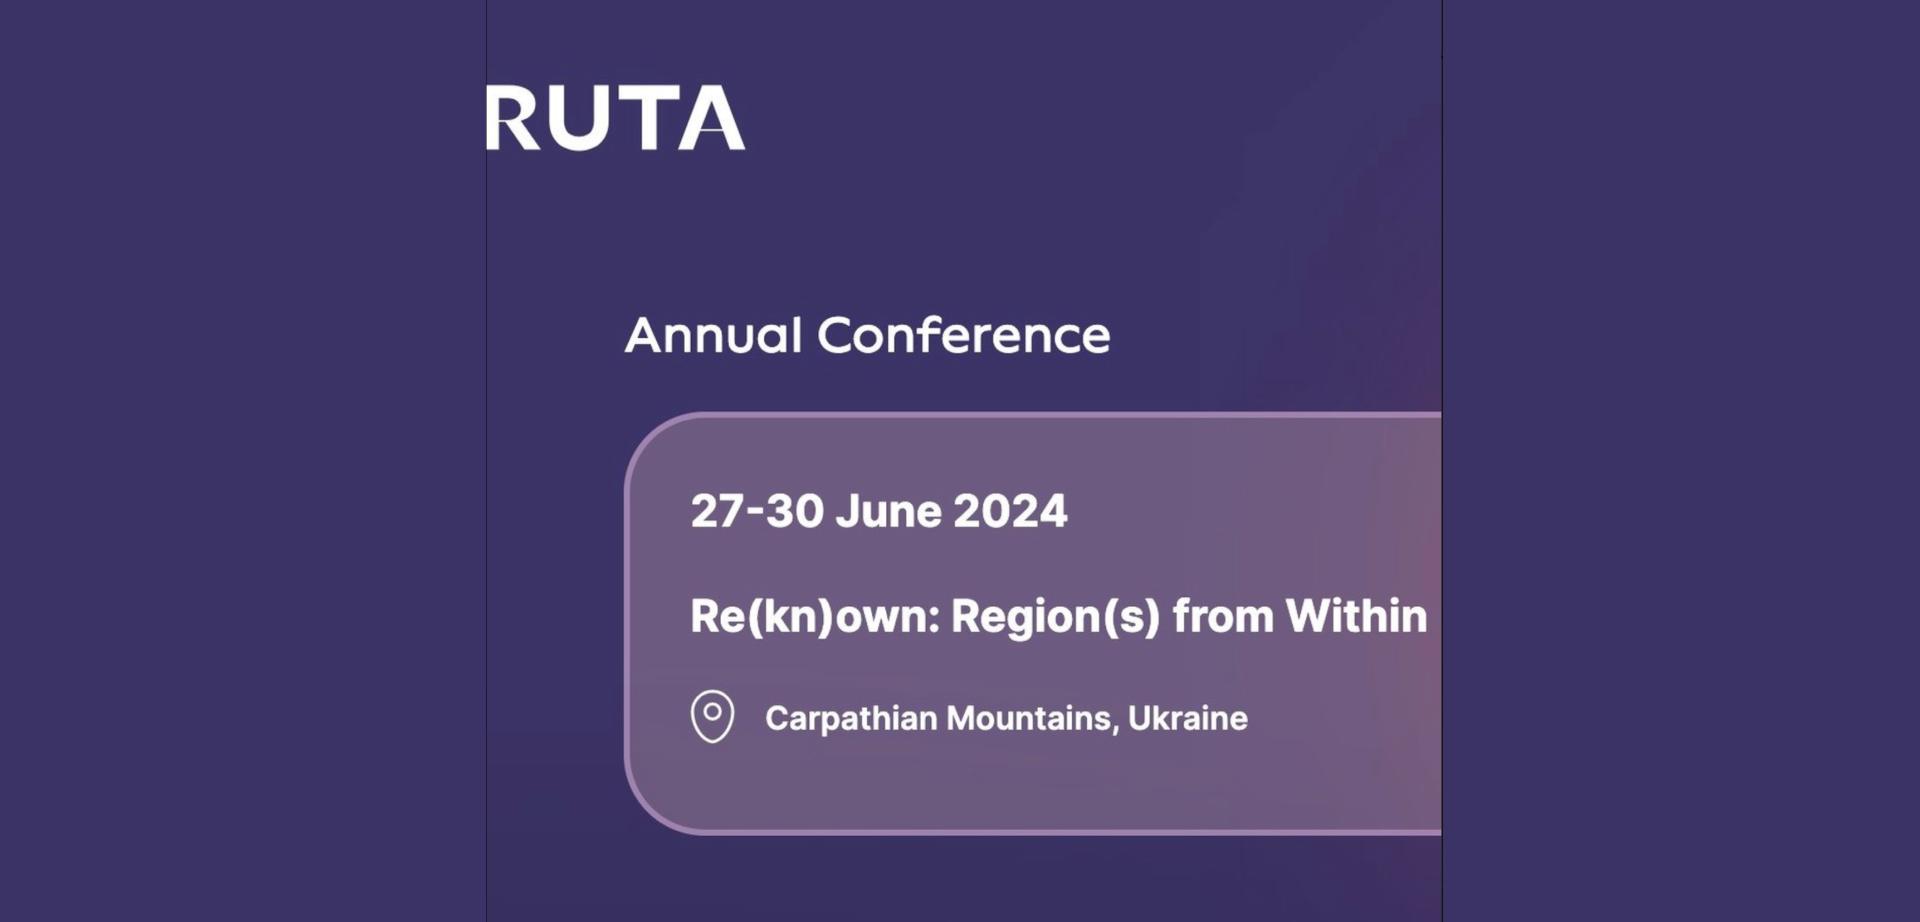 Annual Conference 27-30 June 2024 Re(kn)own: Region(s) from Within